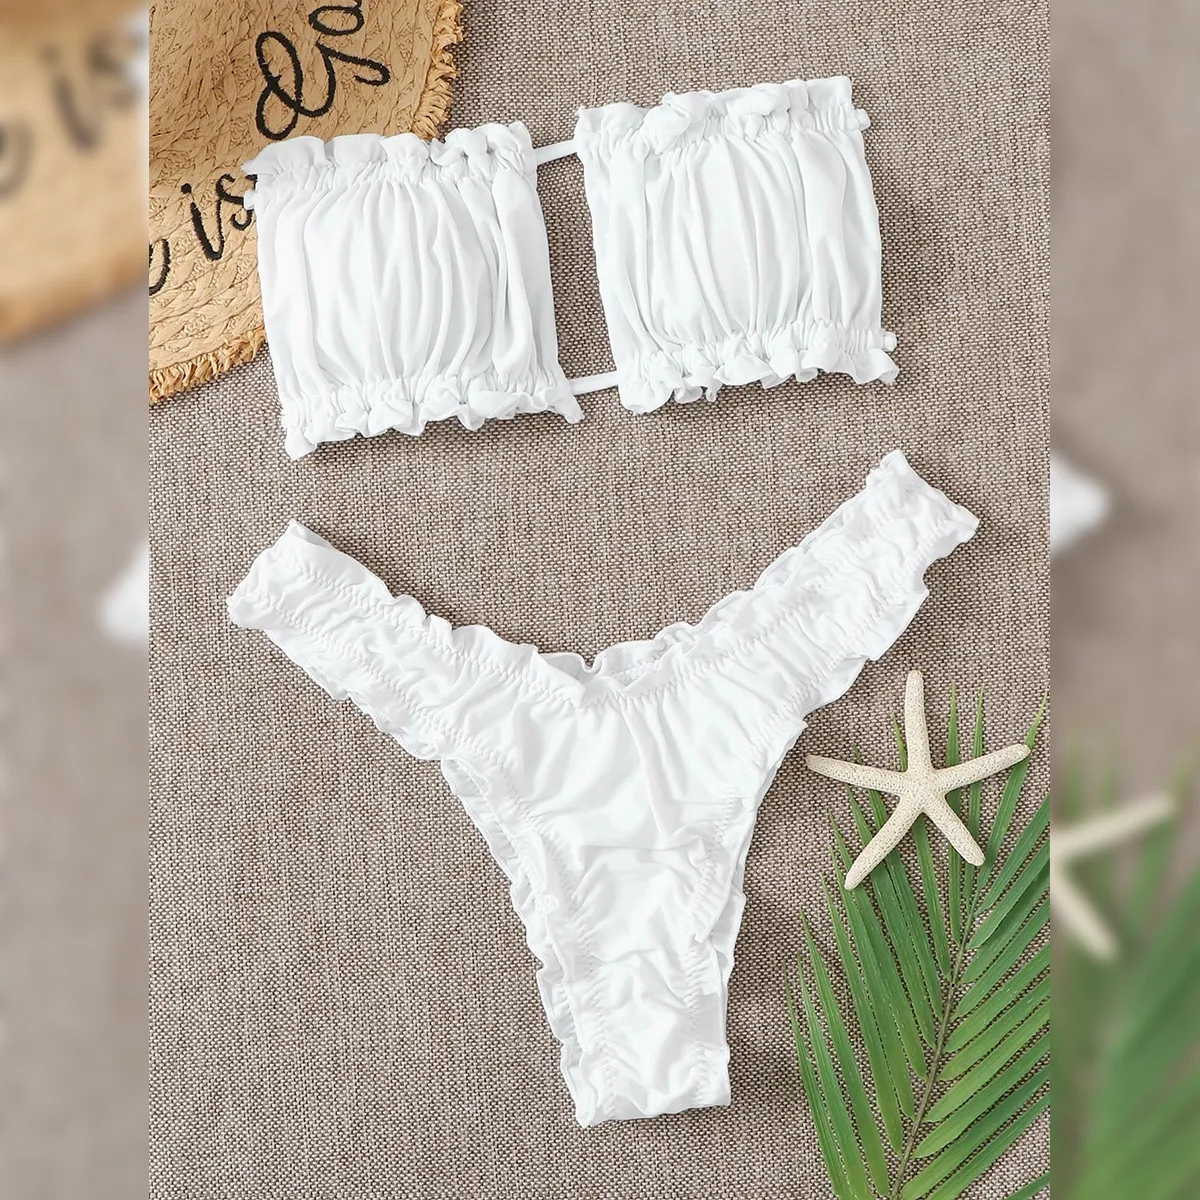 Solid Pleated Edge Bra Style Triangular Swimsuit Bikini Swimsuit White Spicy Girl With Wooden Ear Edge Strap